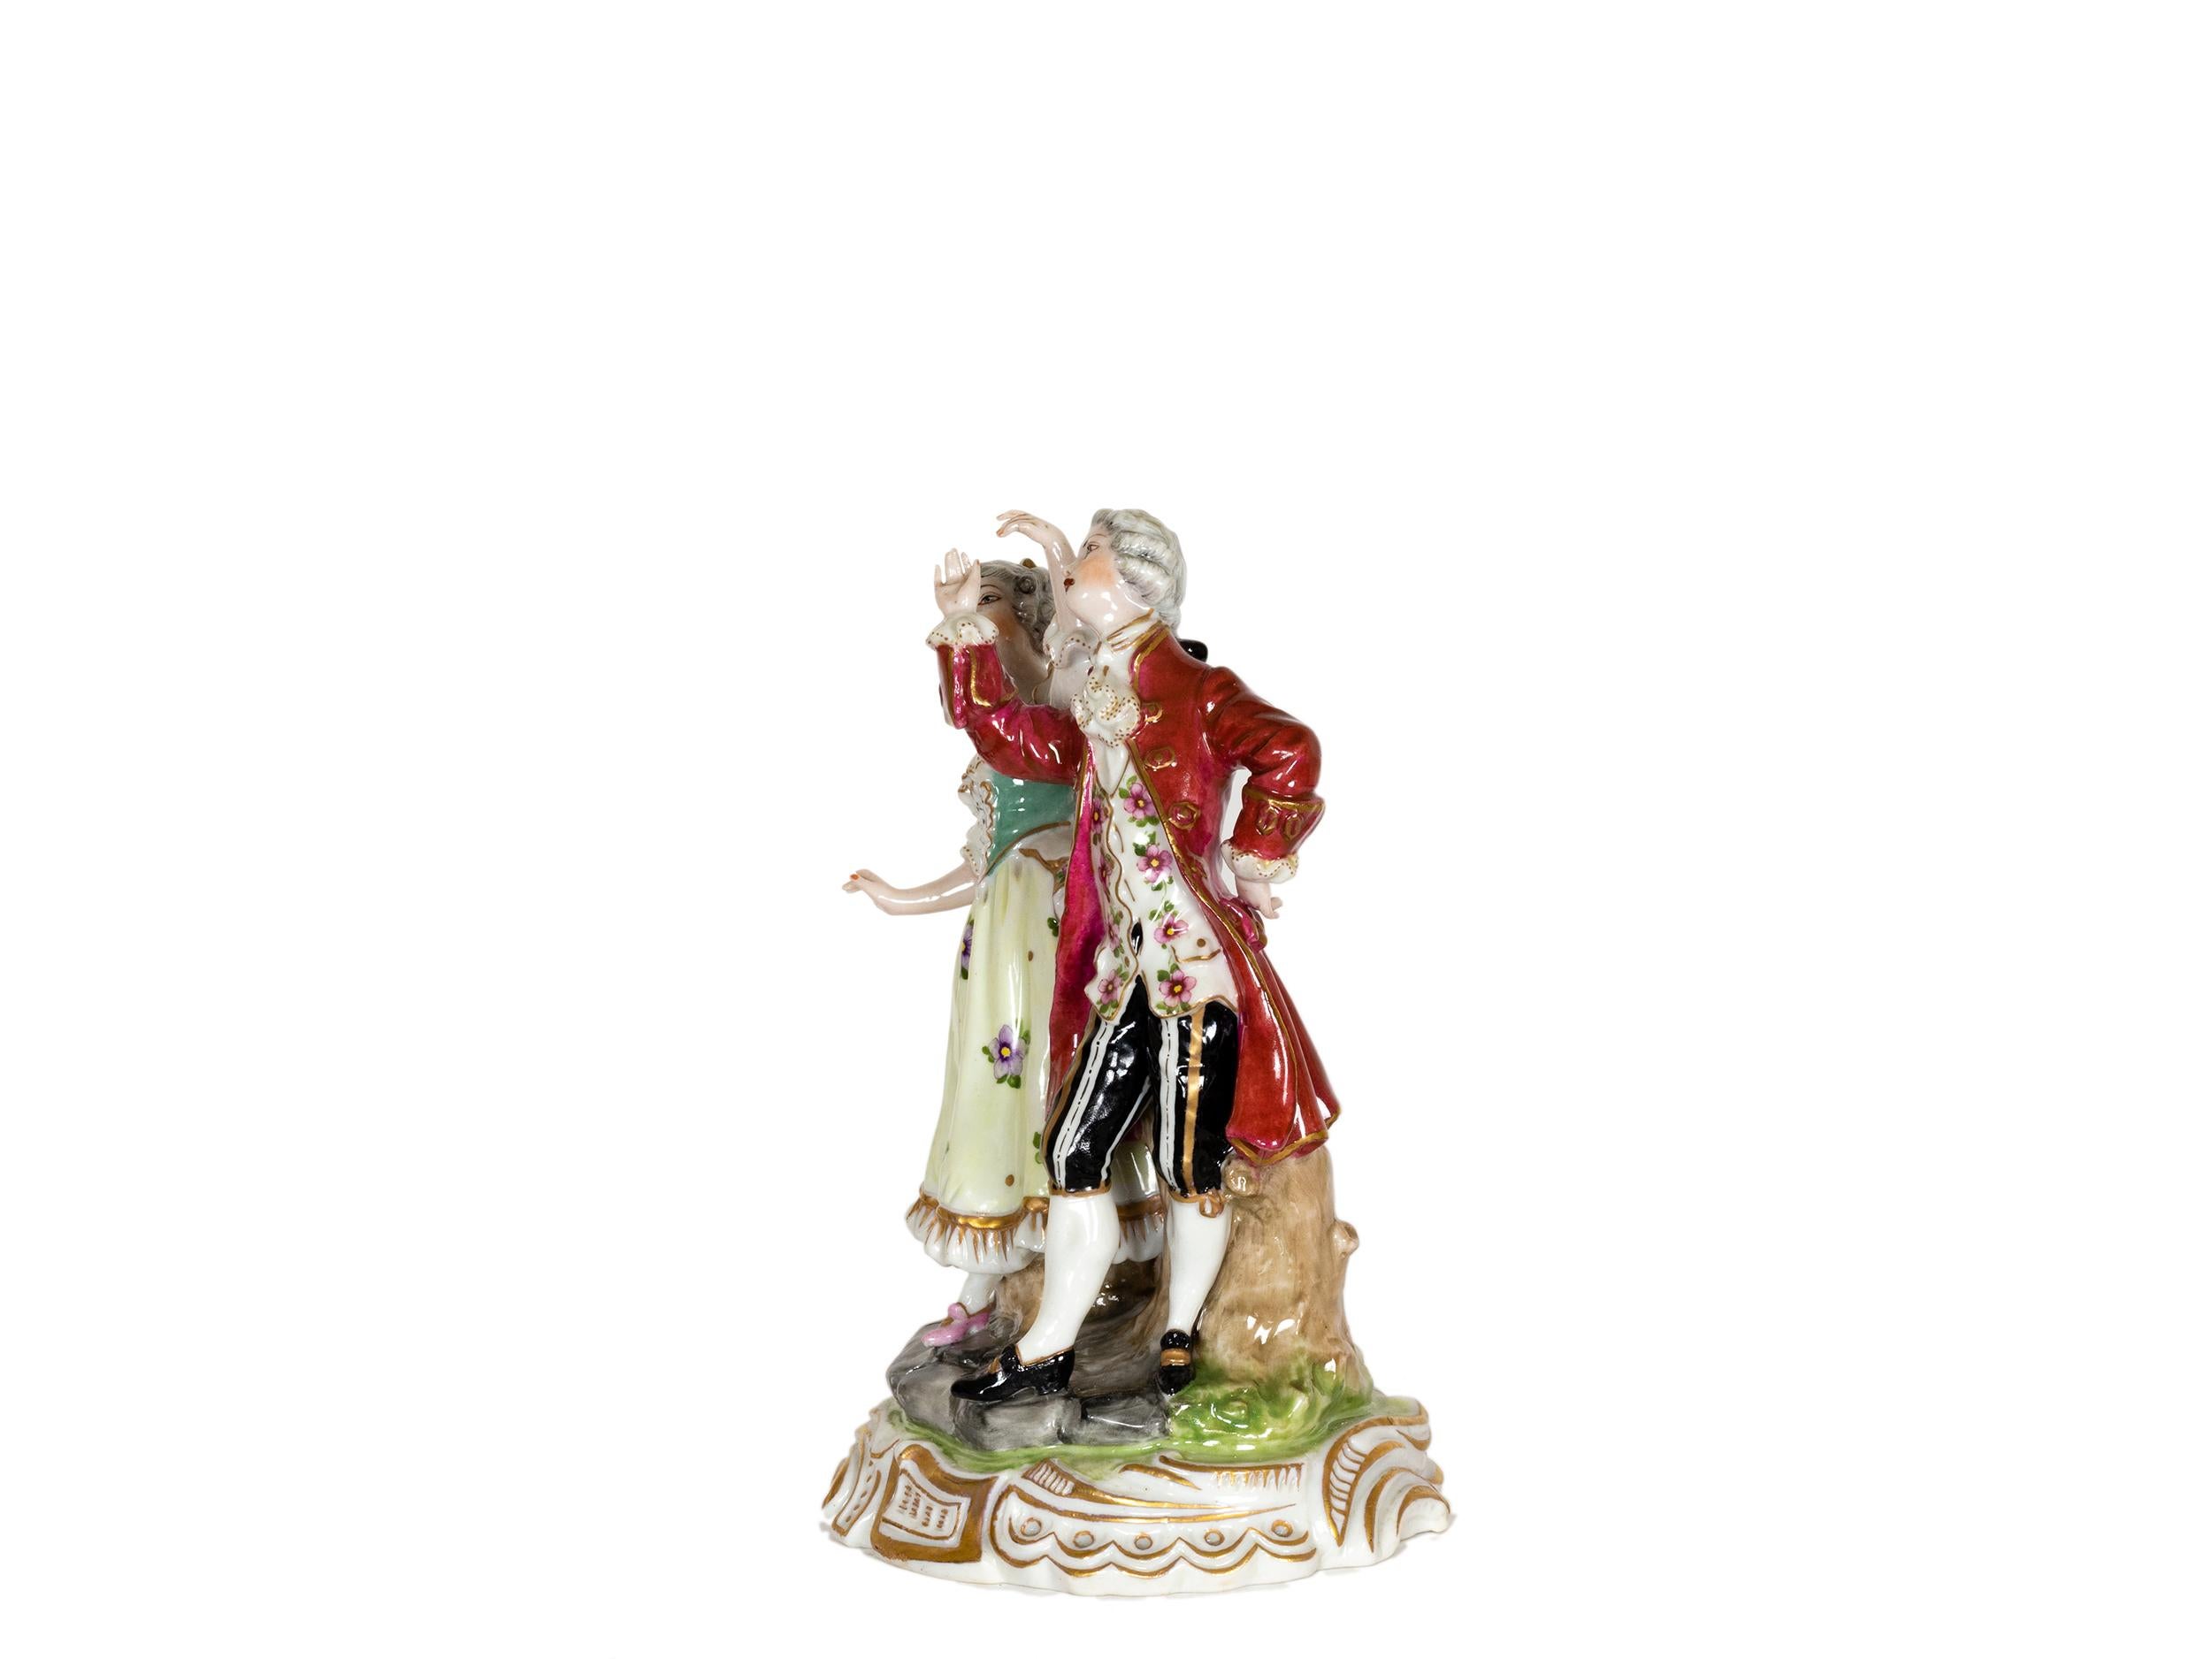 A charming Baroque translucent soft-paste porcelain figurine of a dancing couple of the Volkstedt, Muller & Co, Dresden manufacturing of the late 18th century.
Marked on the base.
